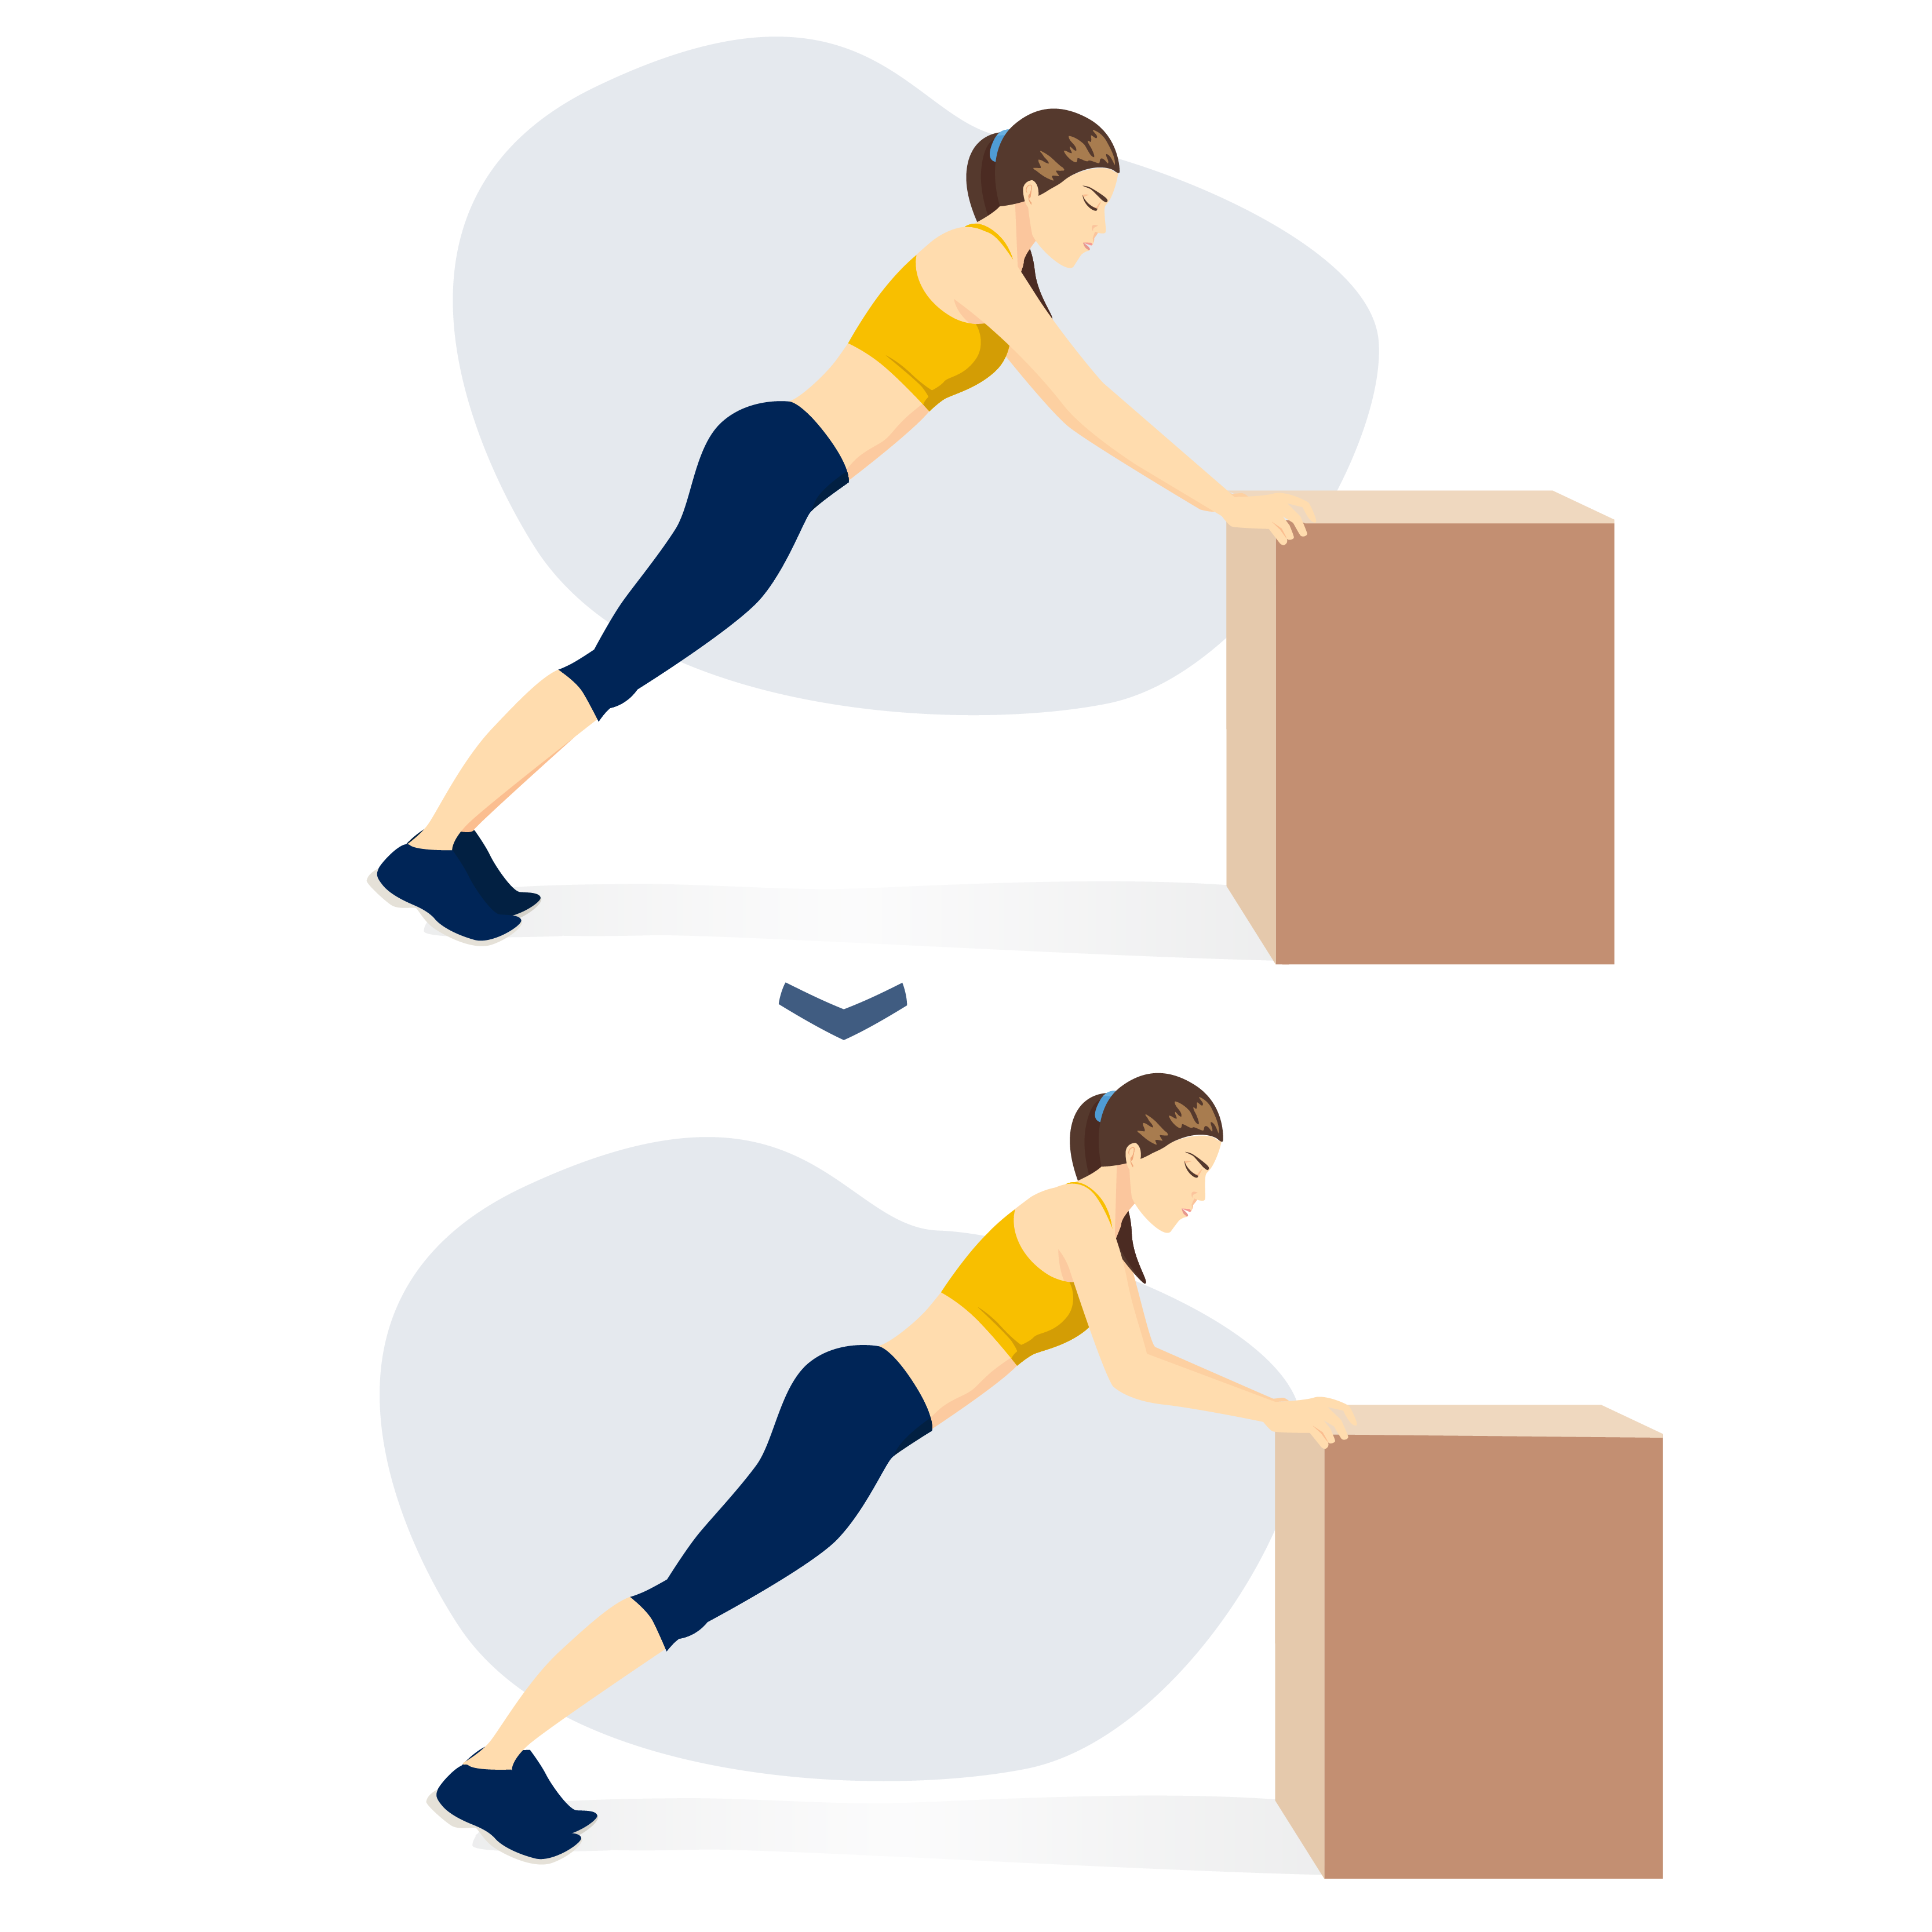 Countertop push-up exercise – Person starts with hands slightly wider than chest on a countertop and body in a straight line. Person lowers chest by bending elbows. Person pushes body back to starting position with straight arms.